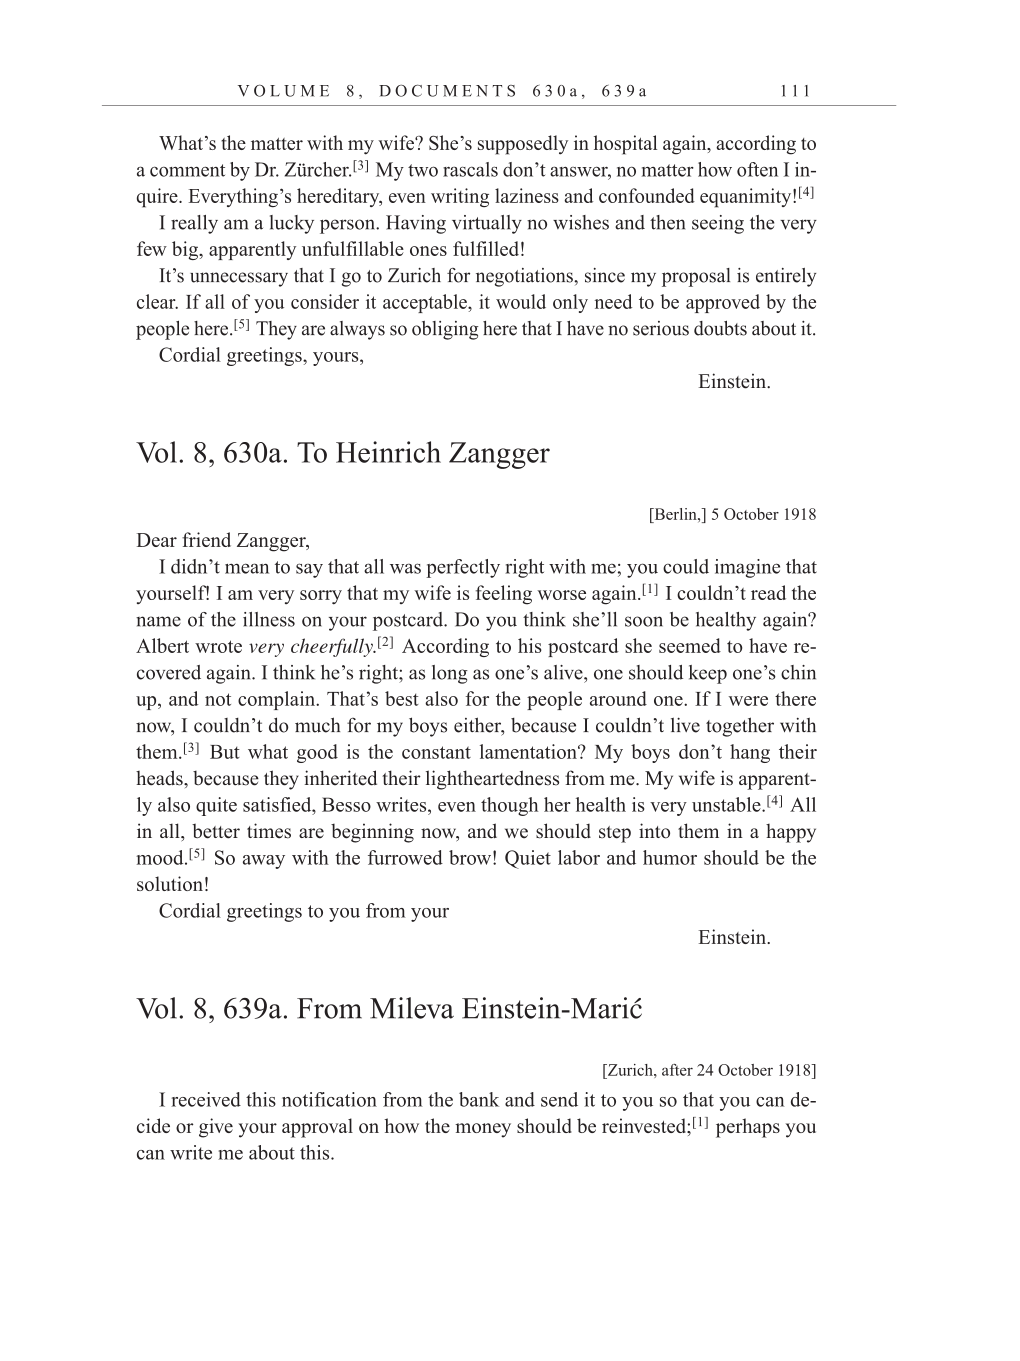 Volume 10: The Berlin Years: Correspondence, May-December 1920, and Supplementary Correspondence, 1909-1920 (English translation supplement) page 111